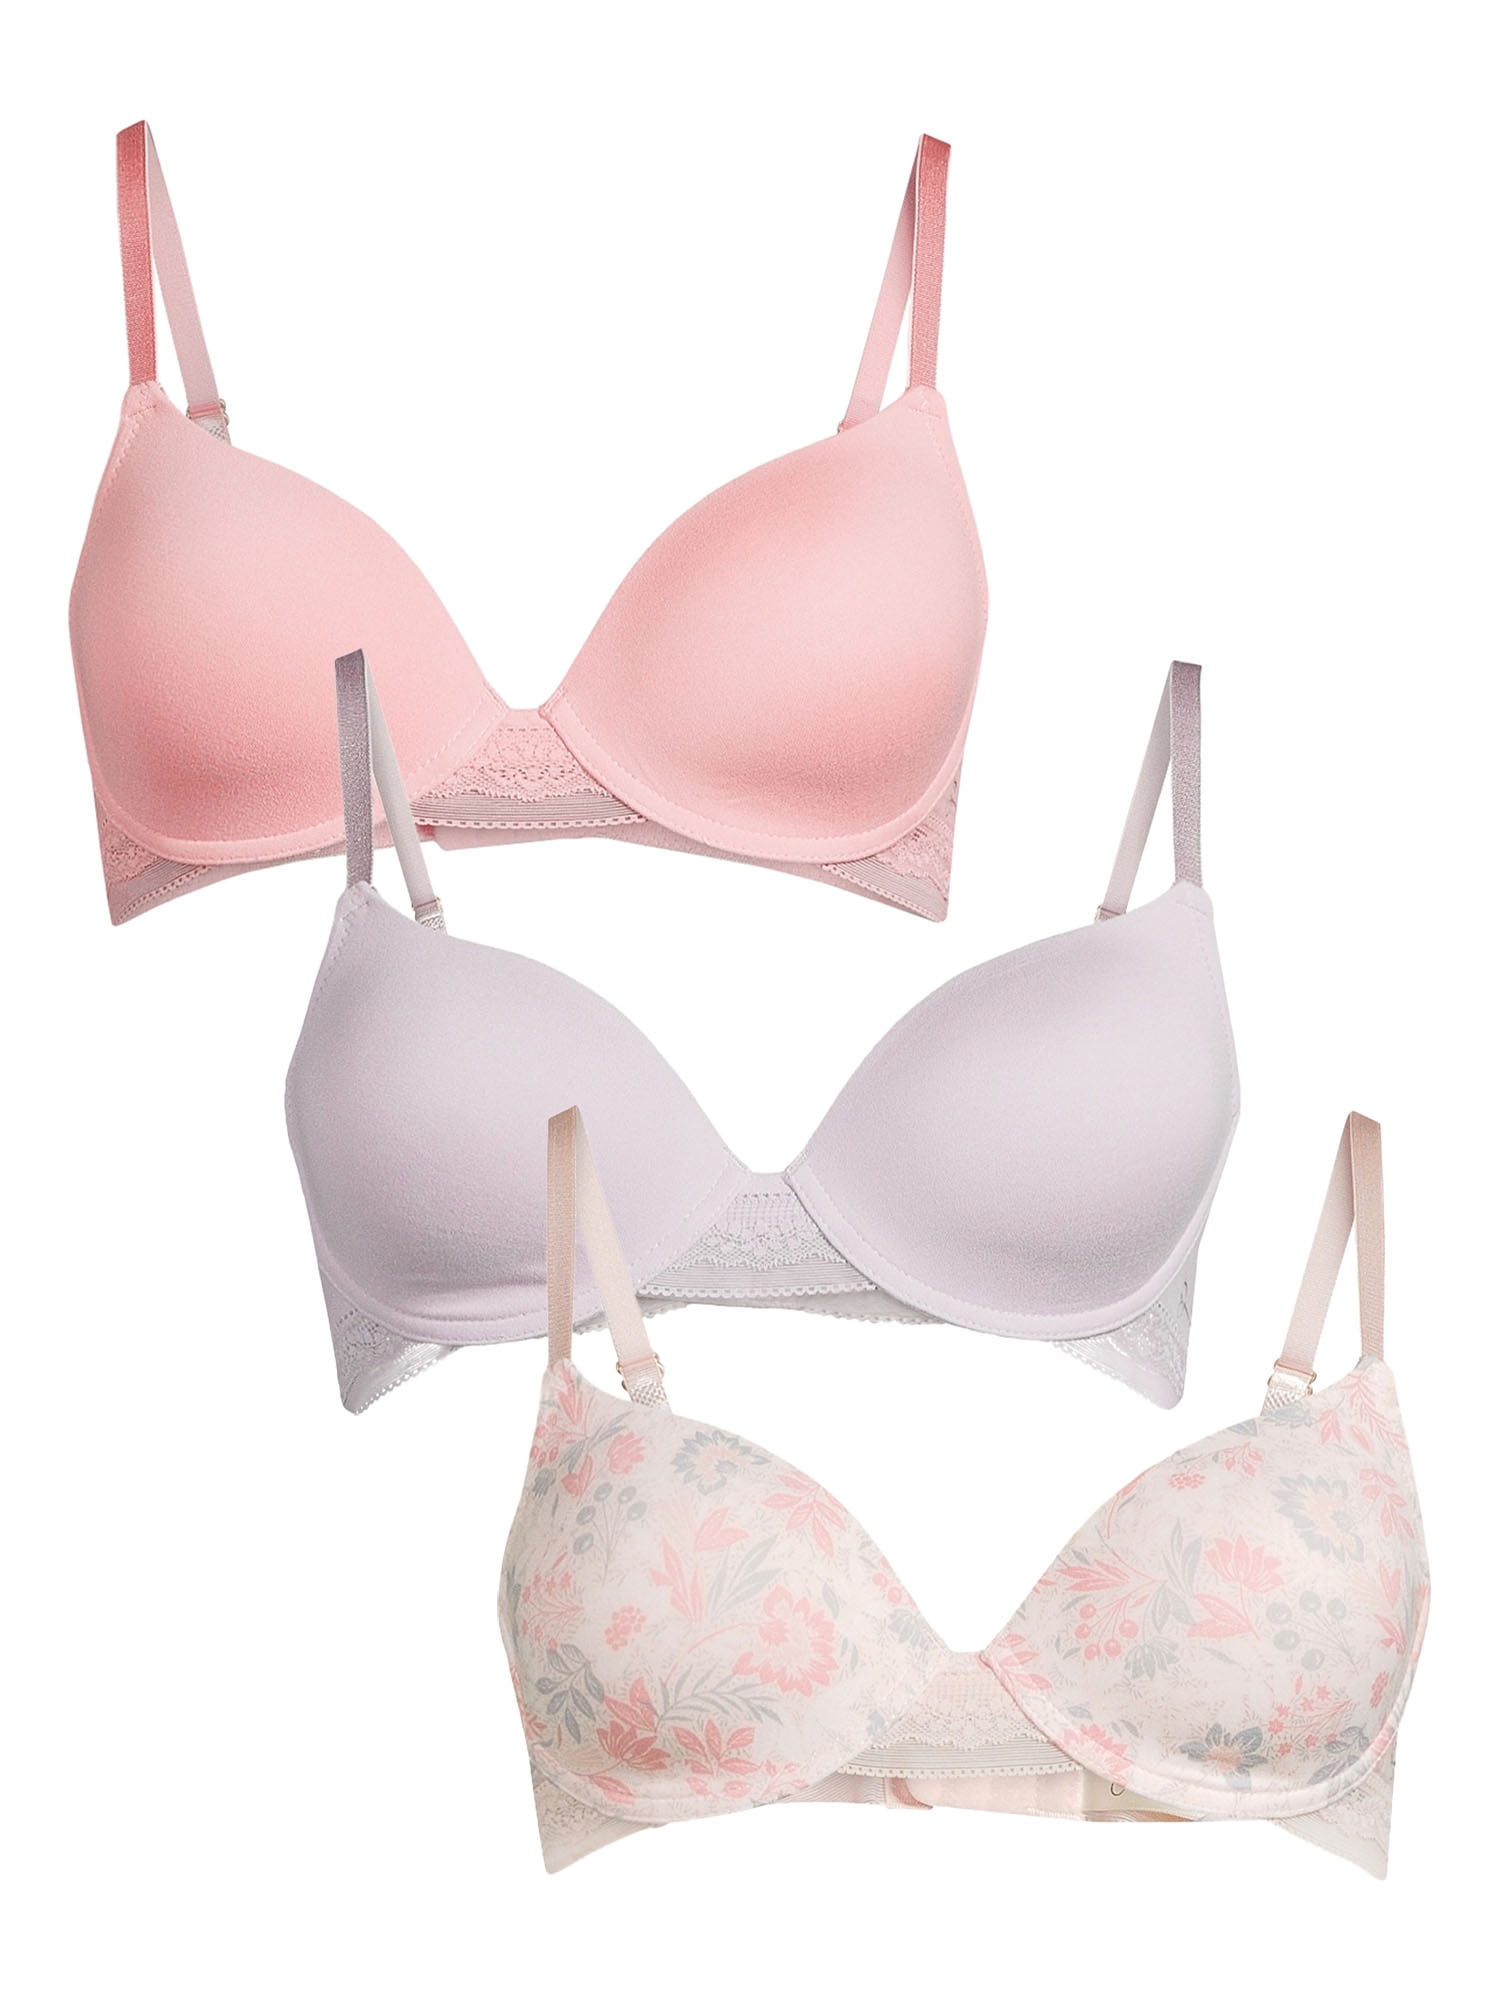 Set of 2 Jessica Simpson Pastel Lace Back Smoothing Bras